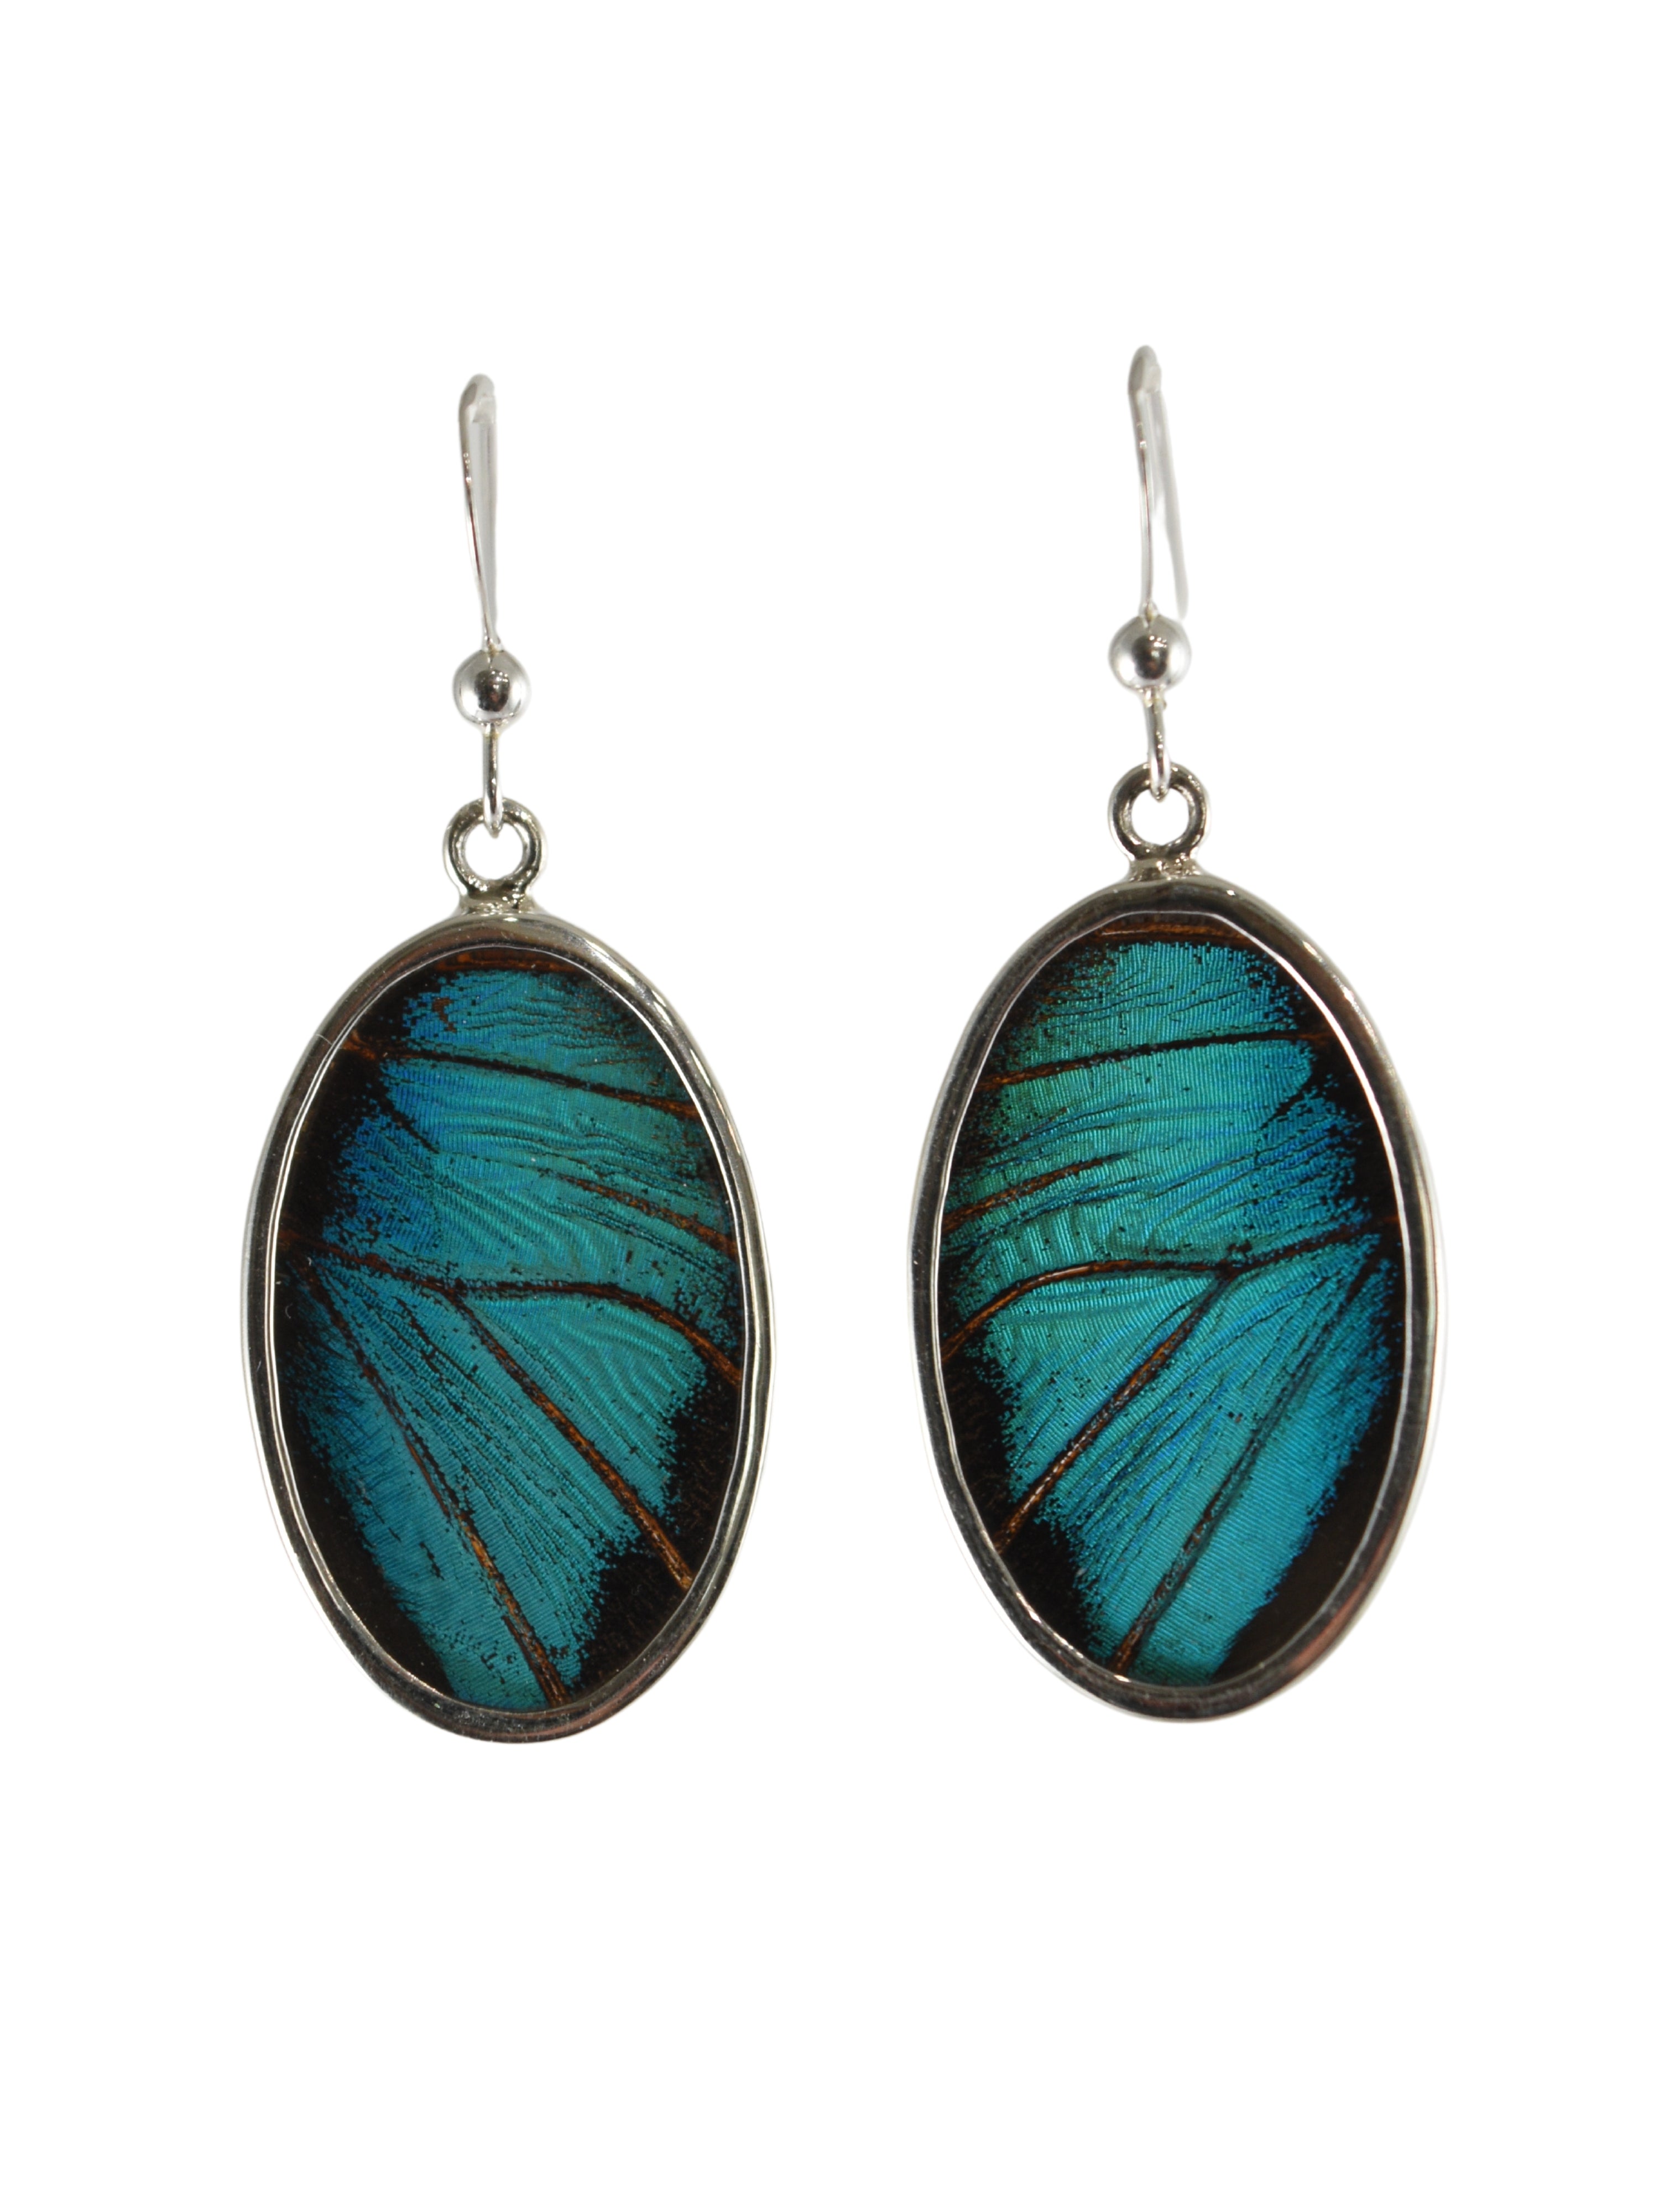 Mariposa Ovals in Turquoise